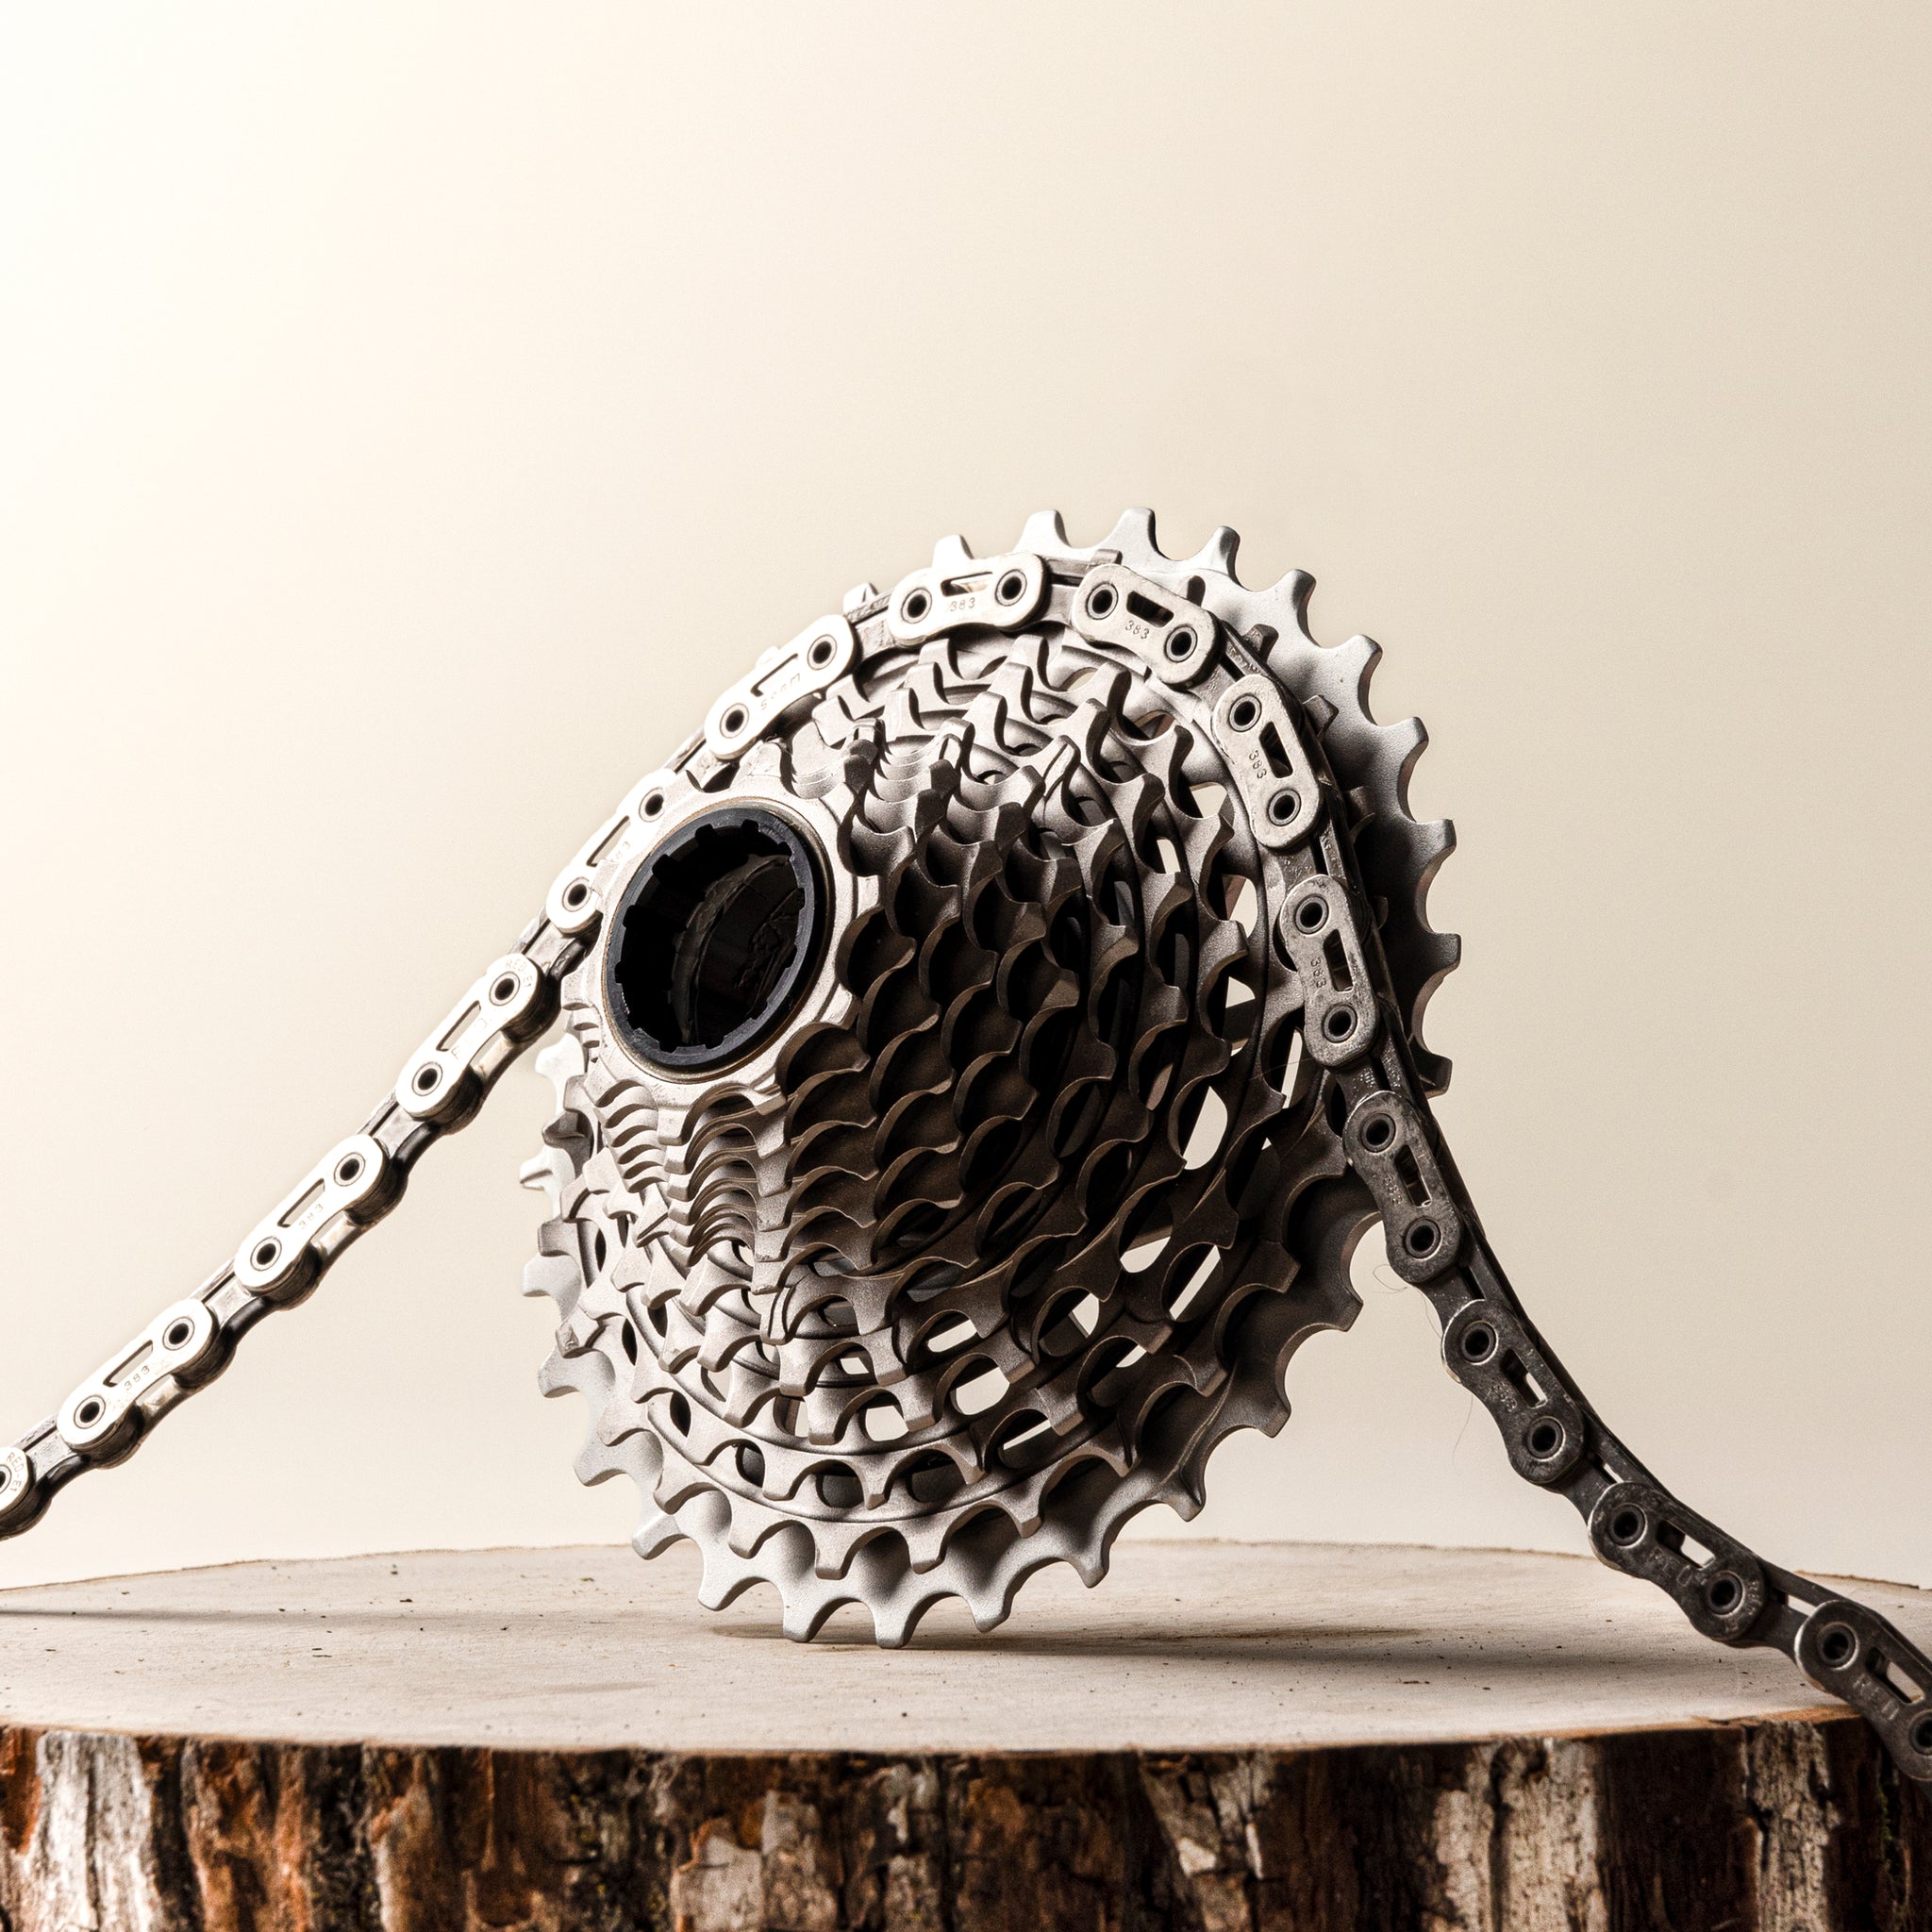 New SRAM RED AXS cassette and chain